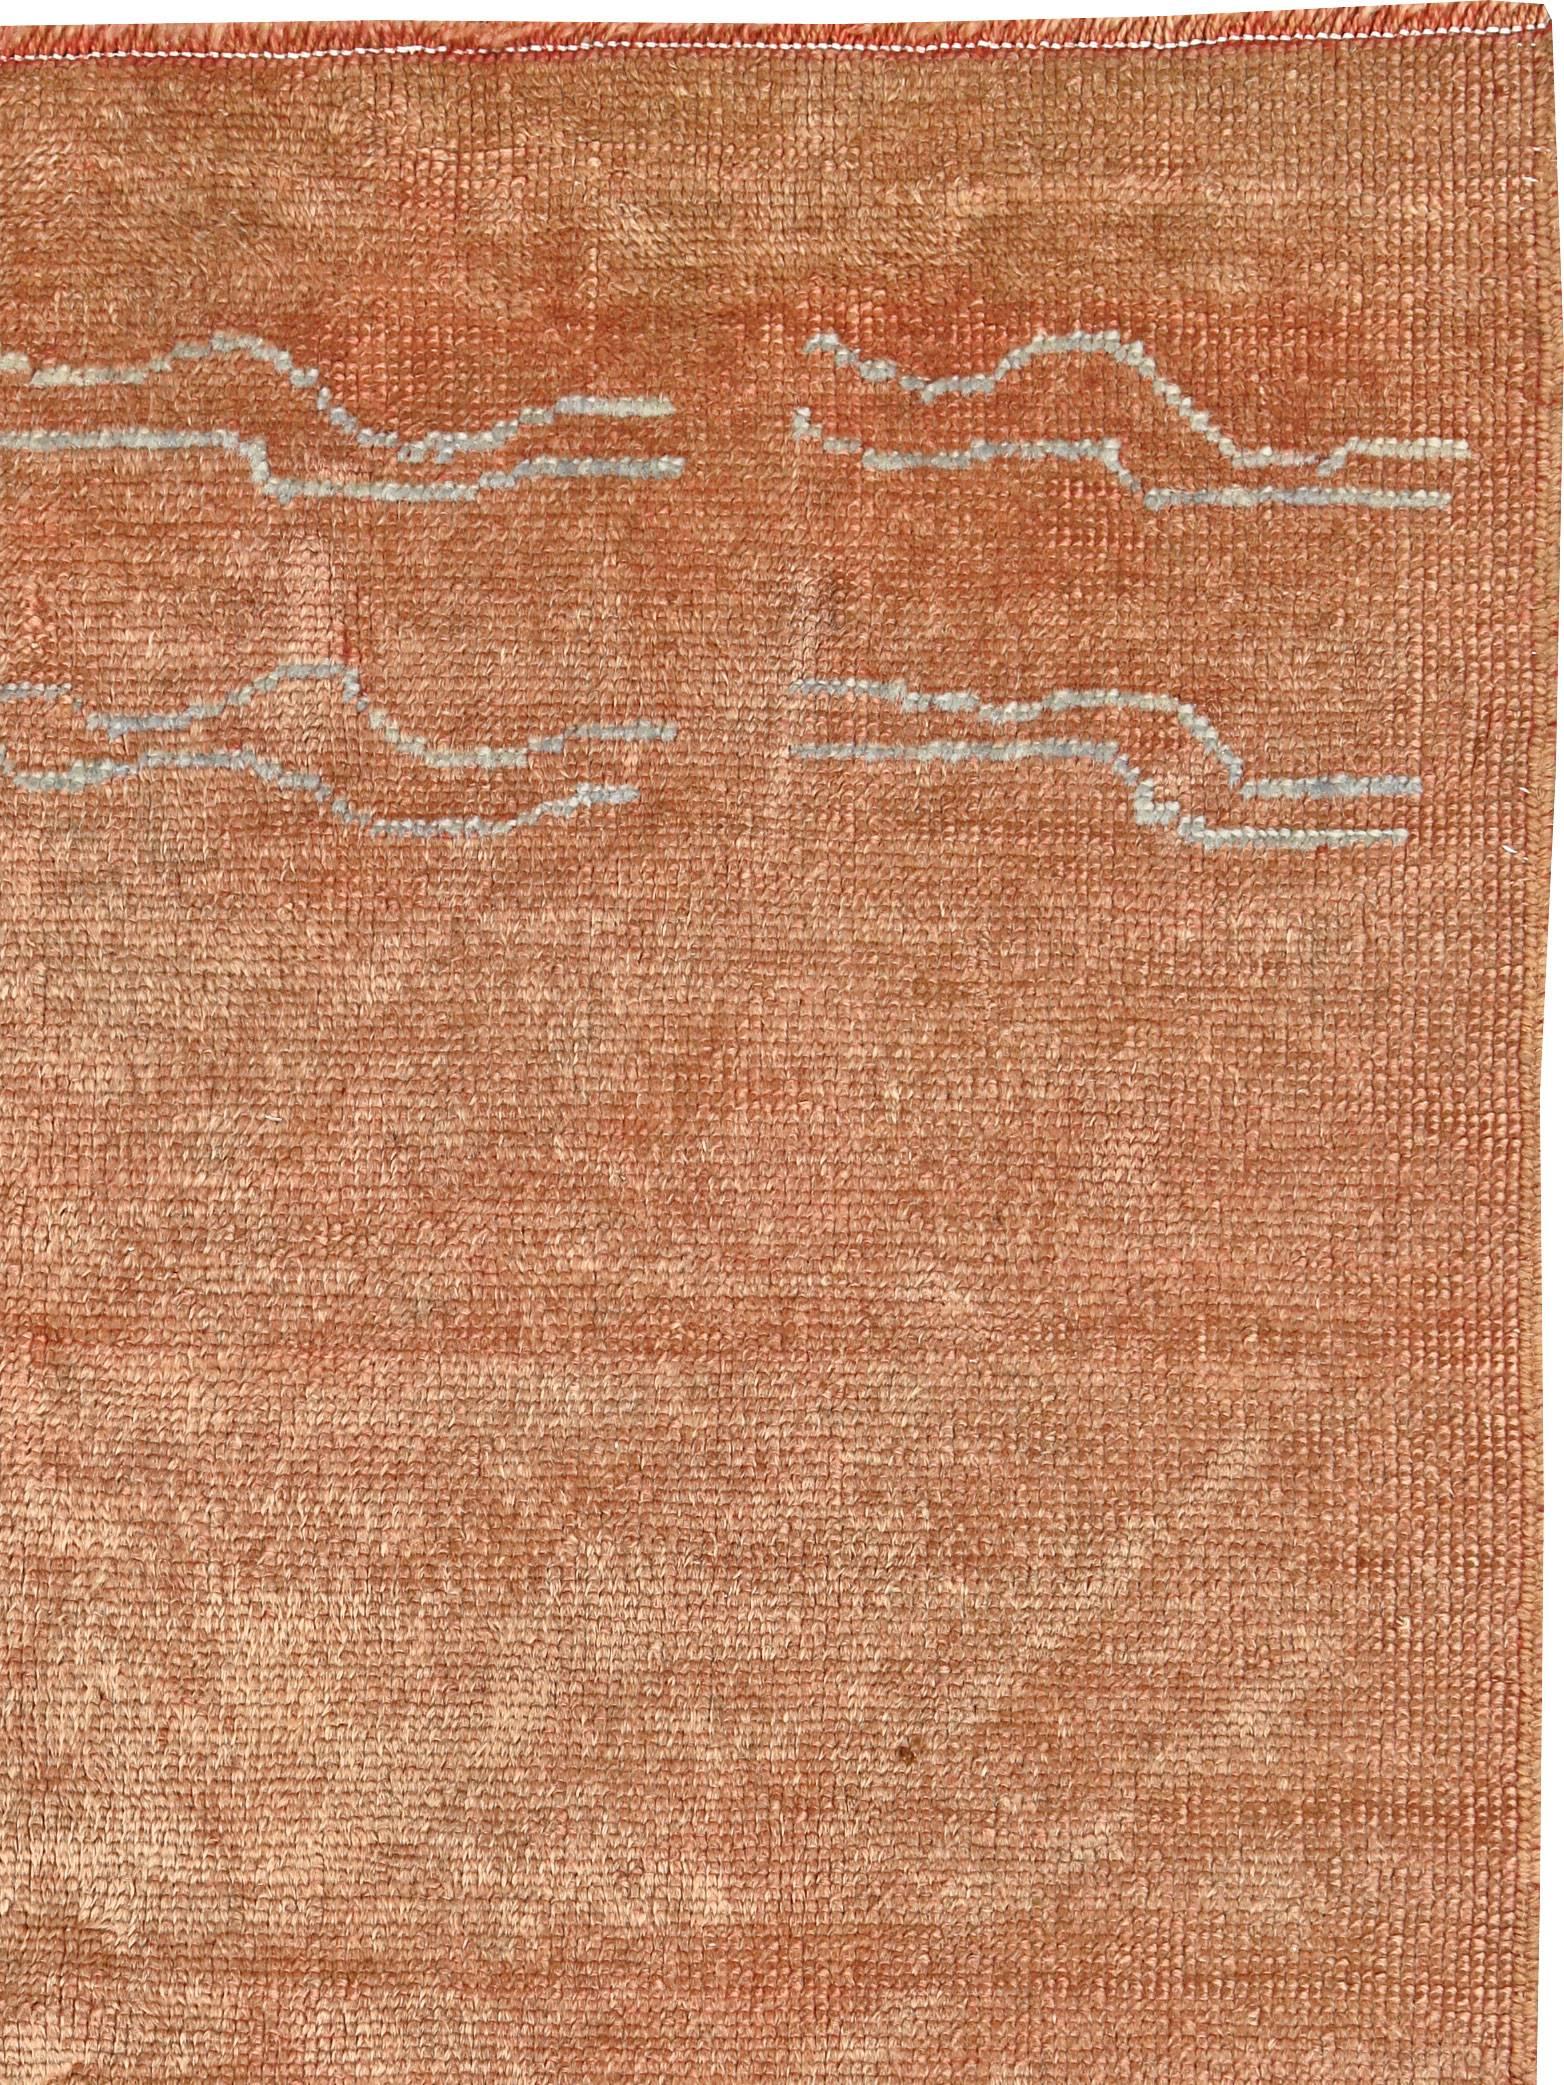 An antique Turkish Oushak carpet from the first quarter of the 20th century.